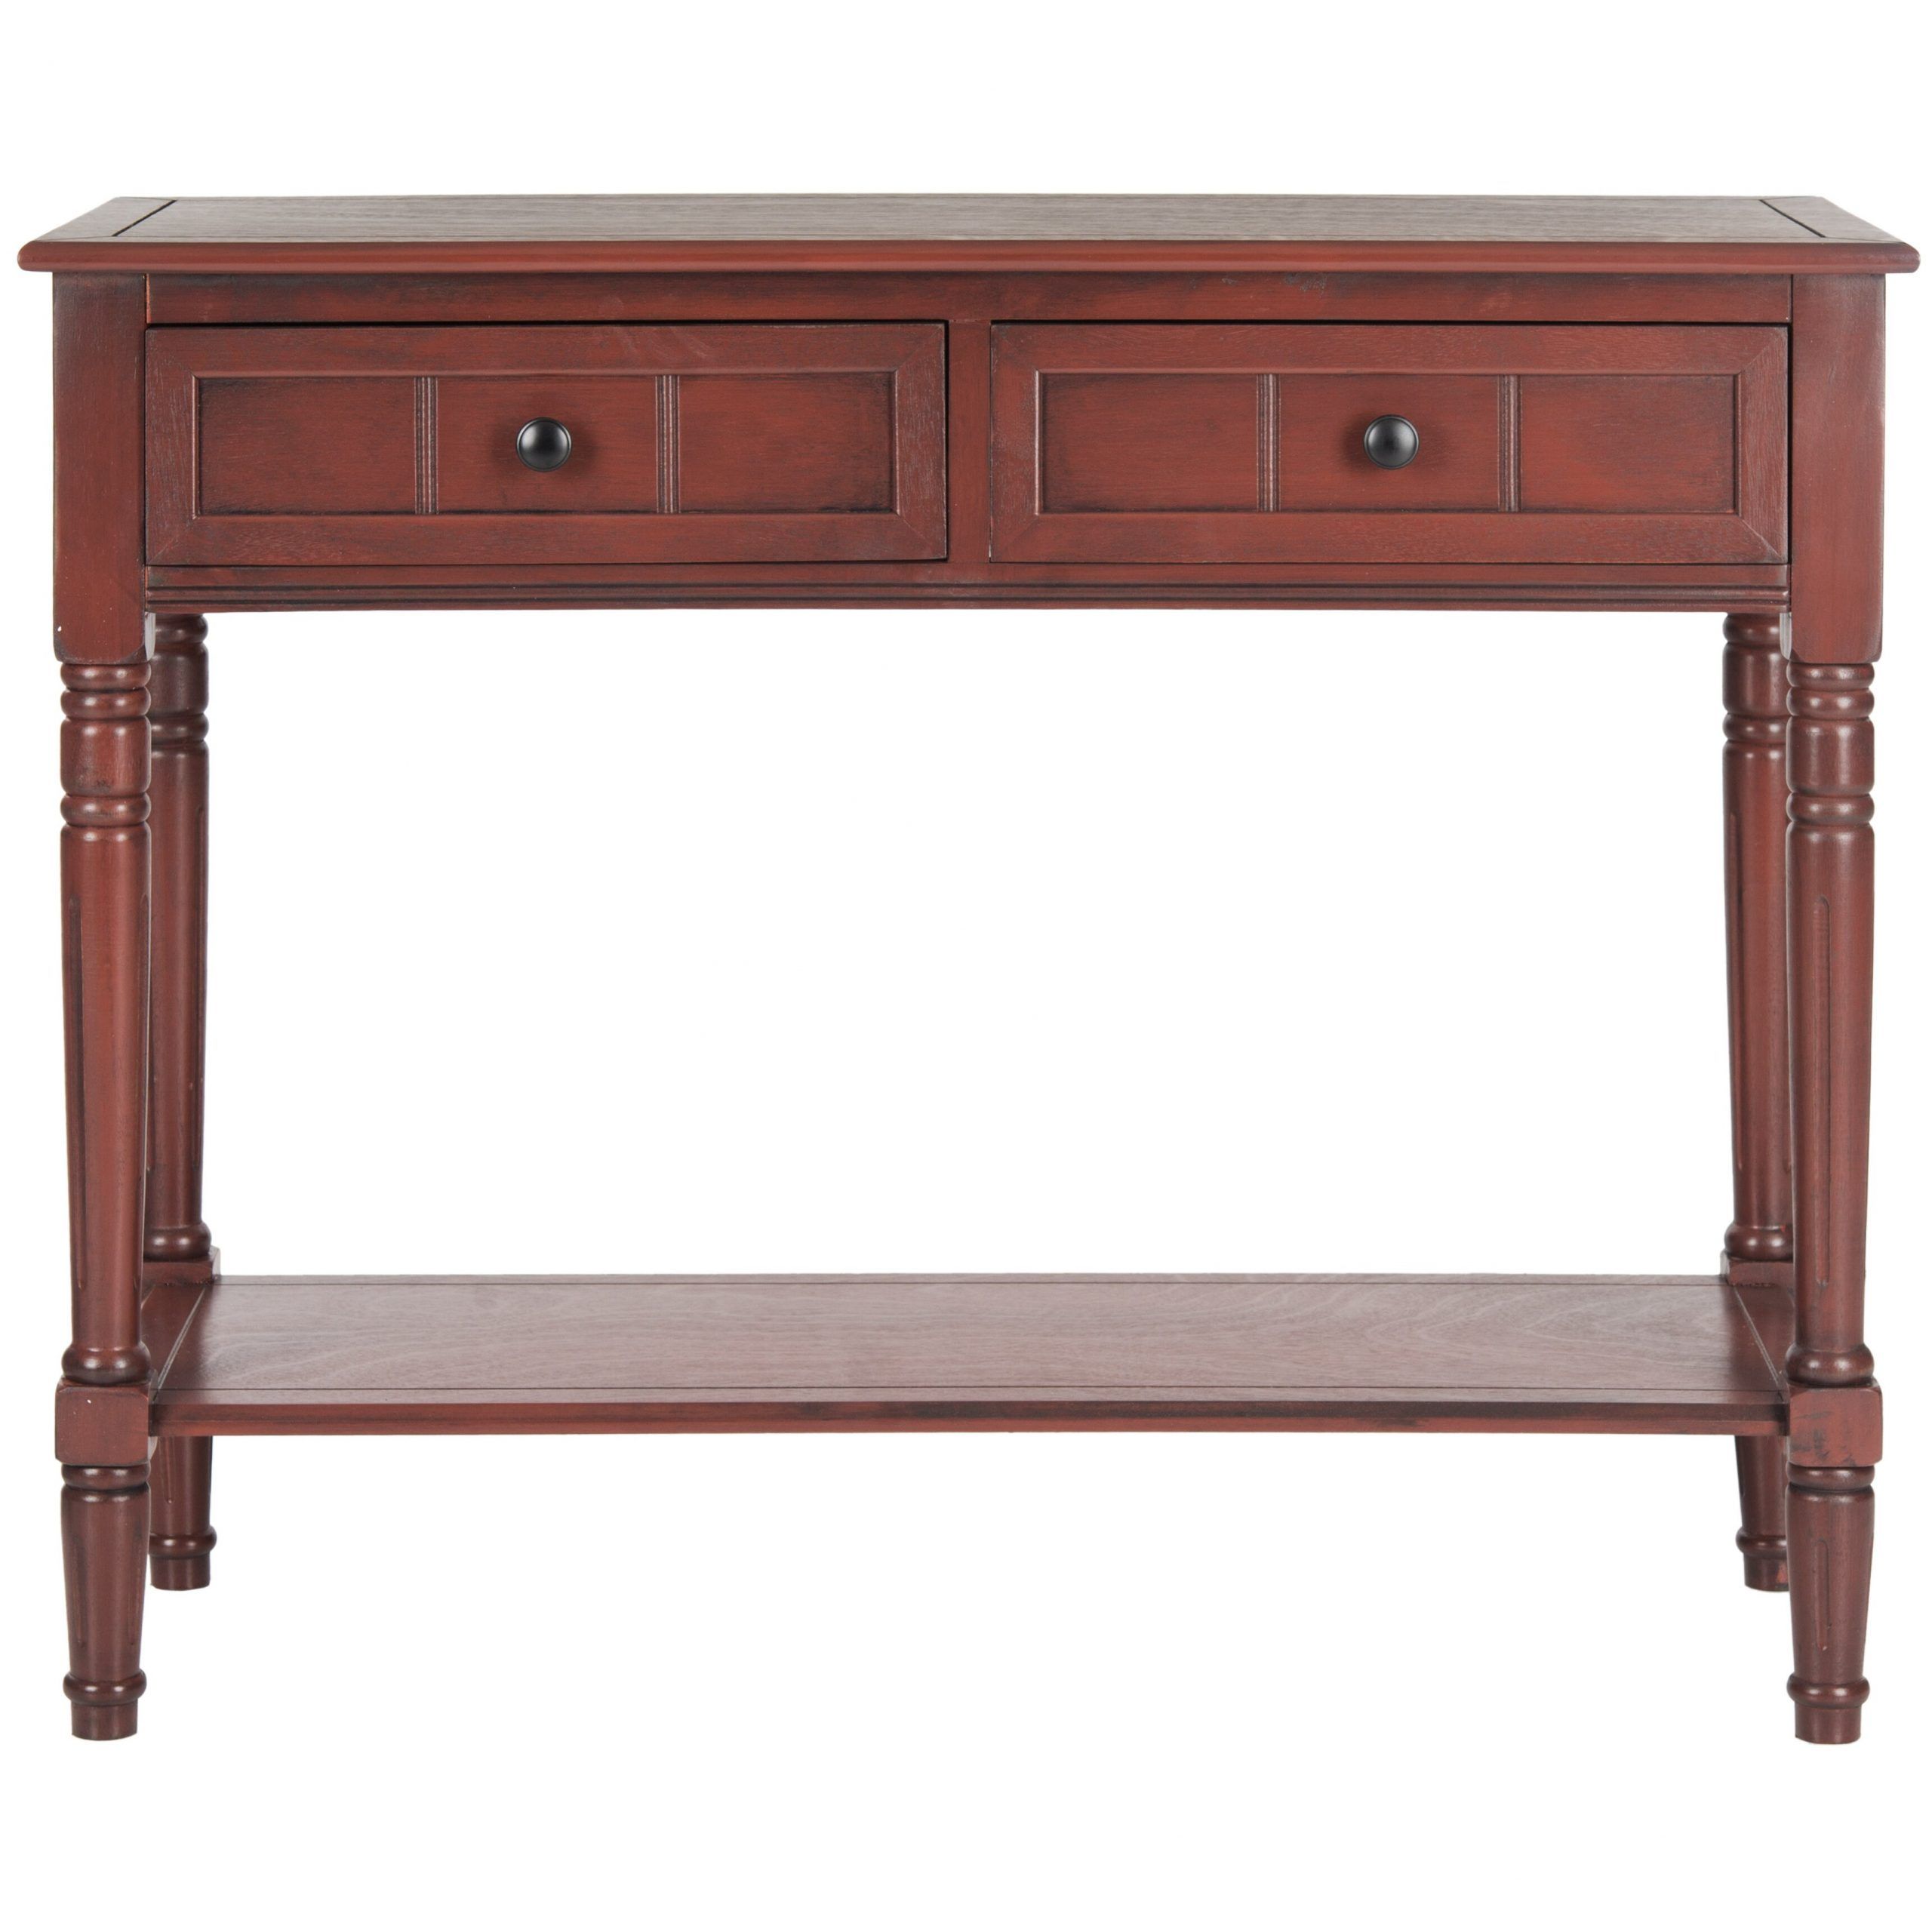 Breakwater Bay Clayton 2 Drawer Console Table & Reviews | Wayfair In 2 Drawer Console Tables (View 2 of 20)